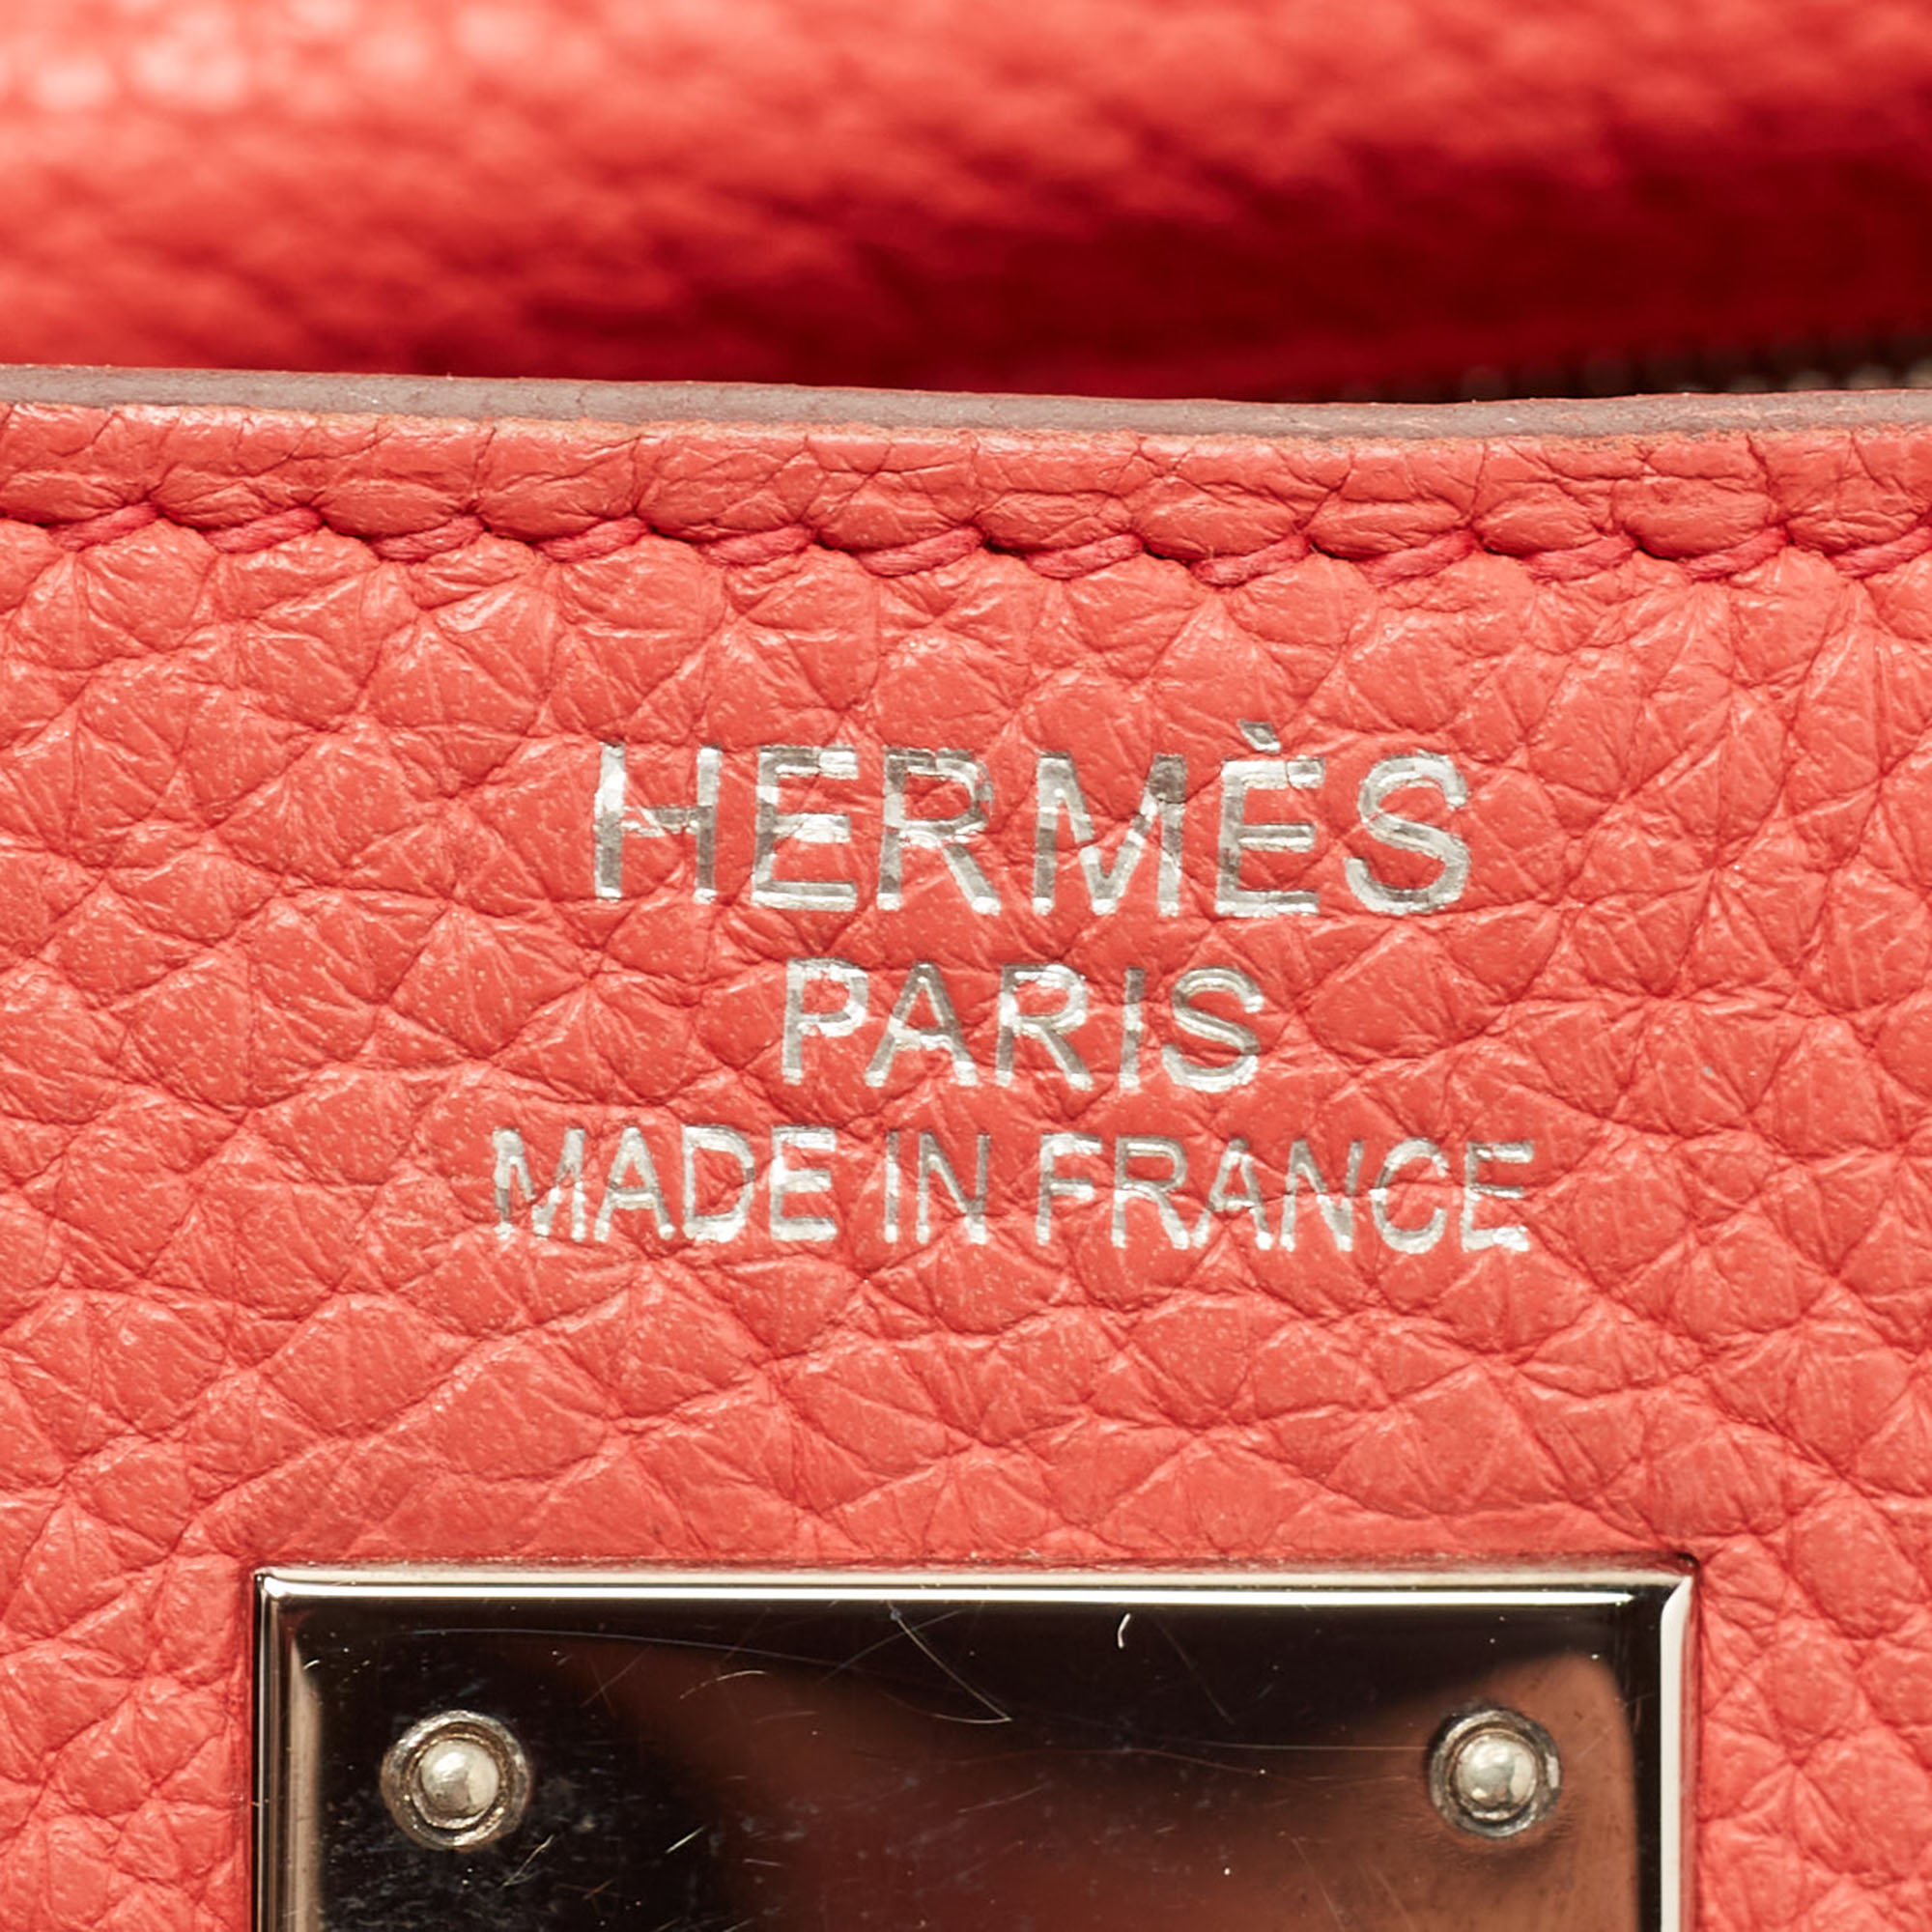 Hermès Rose Jaipur Retourne Kelly 32cm of Clemence Leather with